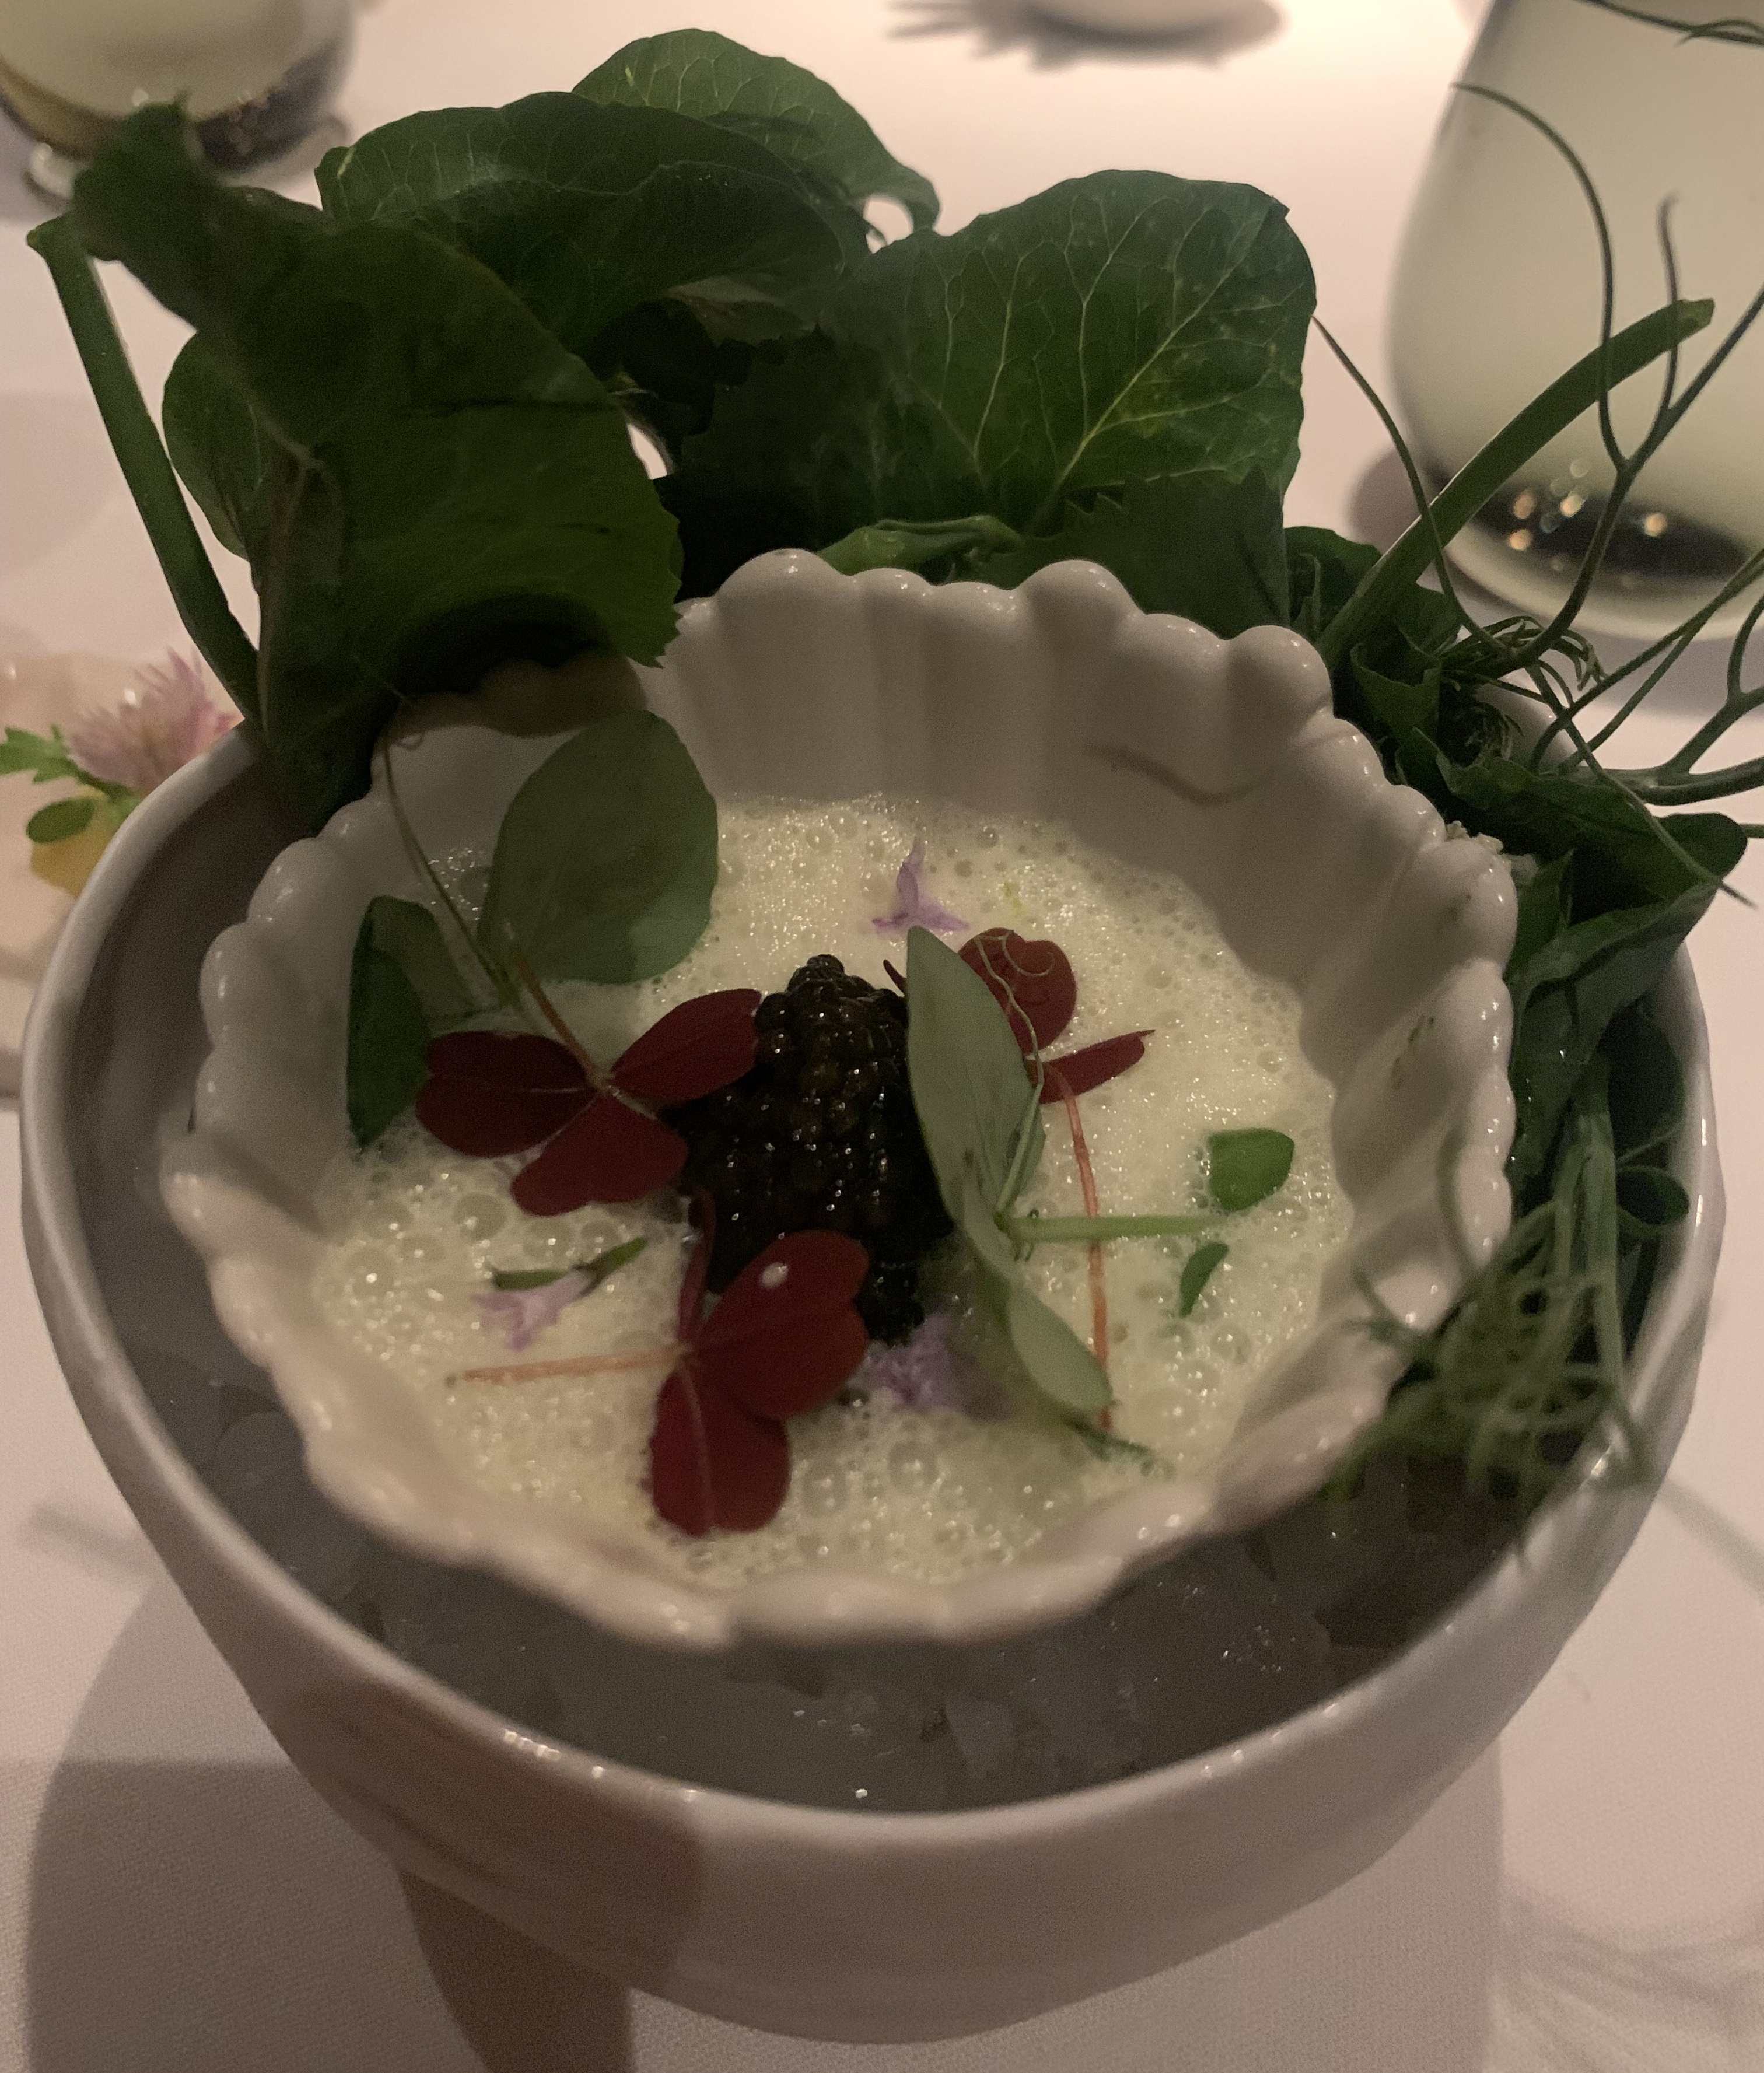 Larger bowl of ice containing a smaller bowl with a mound of caviar atop a lot of white foam. There are tons of greens shoved between the two bowls, and garnishing the foam are pea flowers, greens, and a couple red leaves.